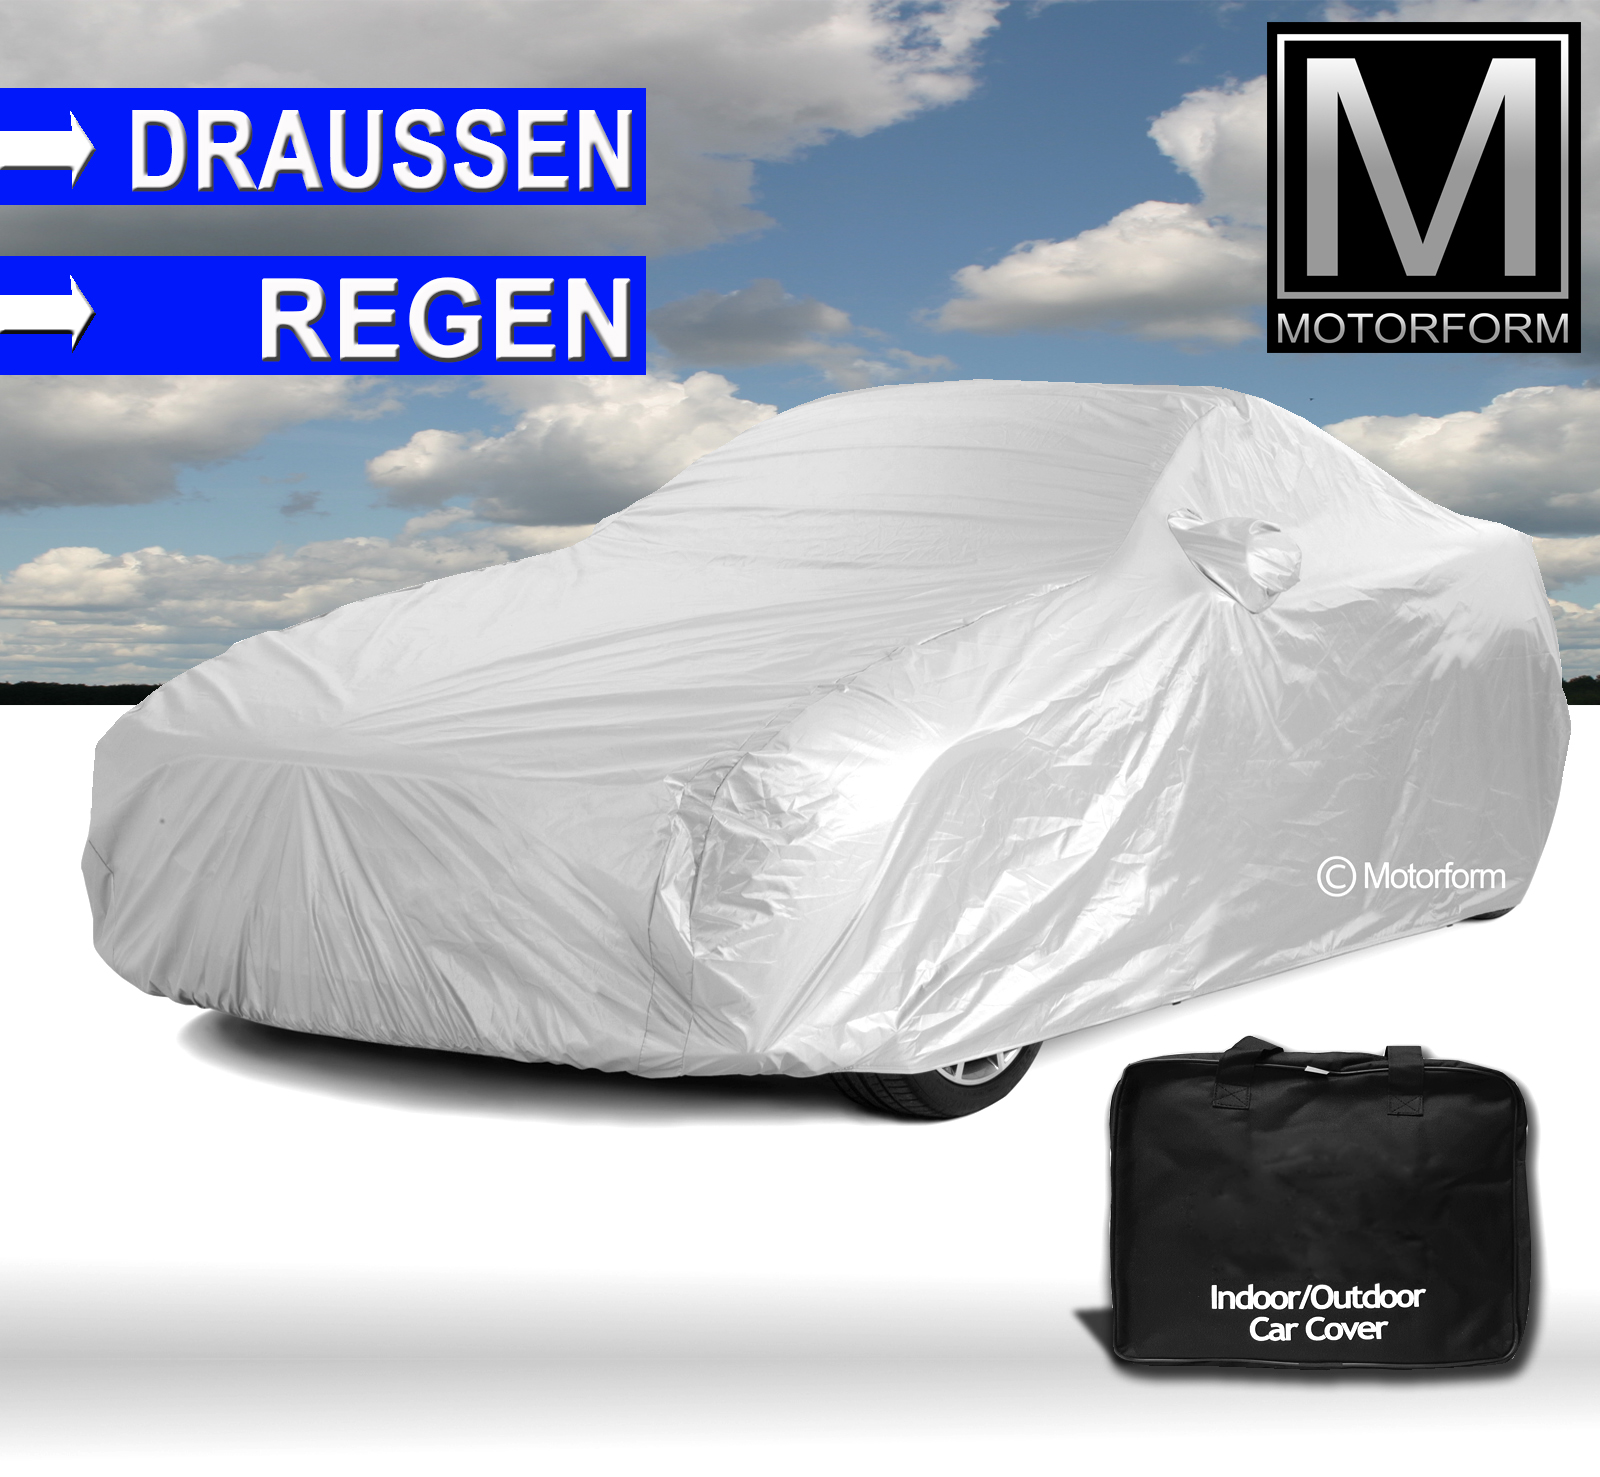 Voyager Outdoor Car Cover for Audi R8 Spyder (2010-15)